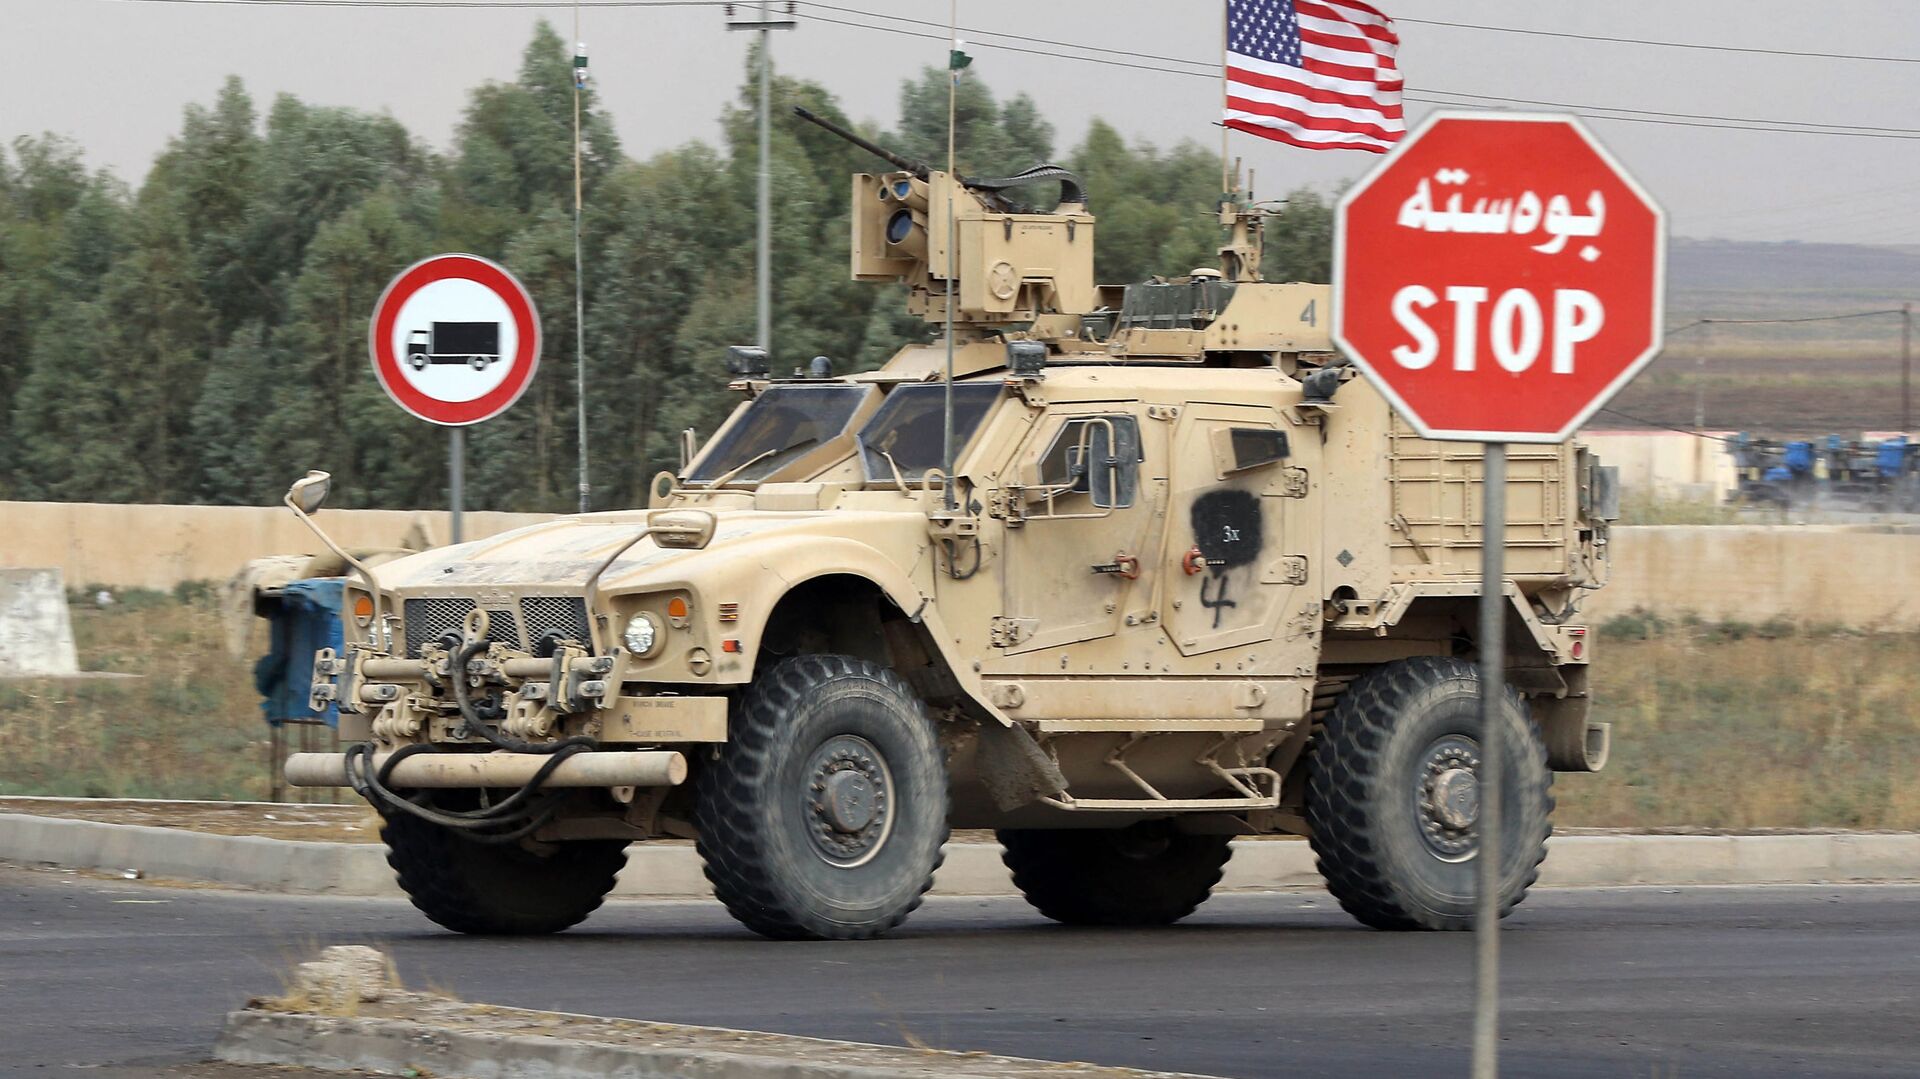 A US military vehicle, part of a convoy, arrives near the Iraqi Kurdish town of Bardarash in the Dohuk governorate after withdrawing from northern Syria on October 21, 2019 - Sputnik International, 1920, 27.03.2023